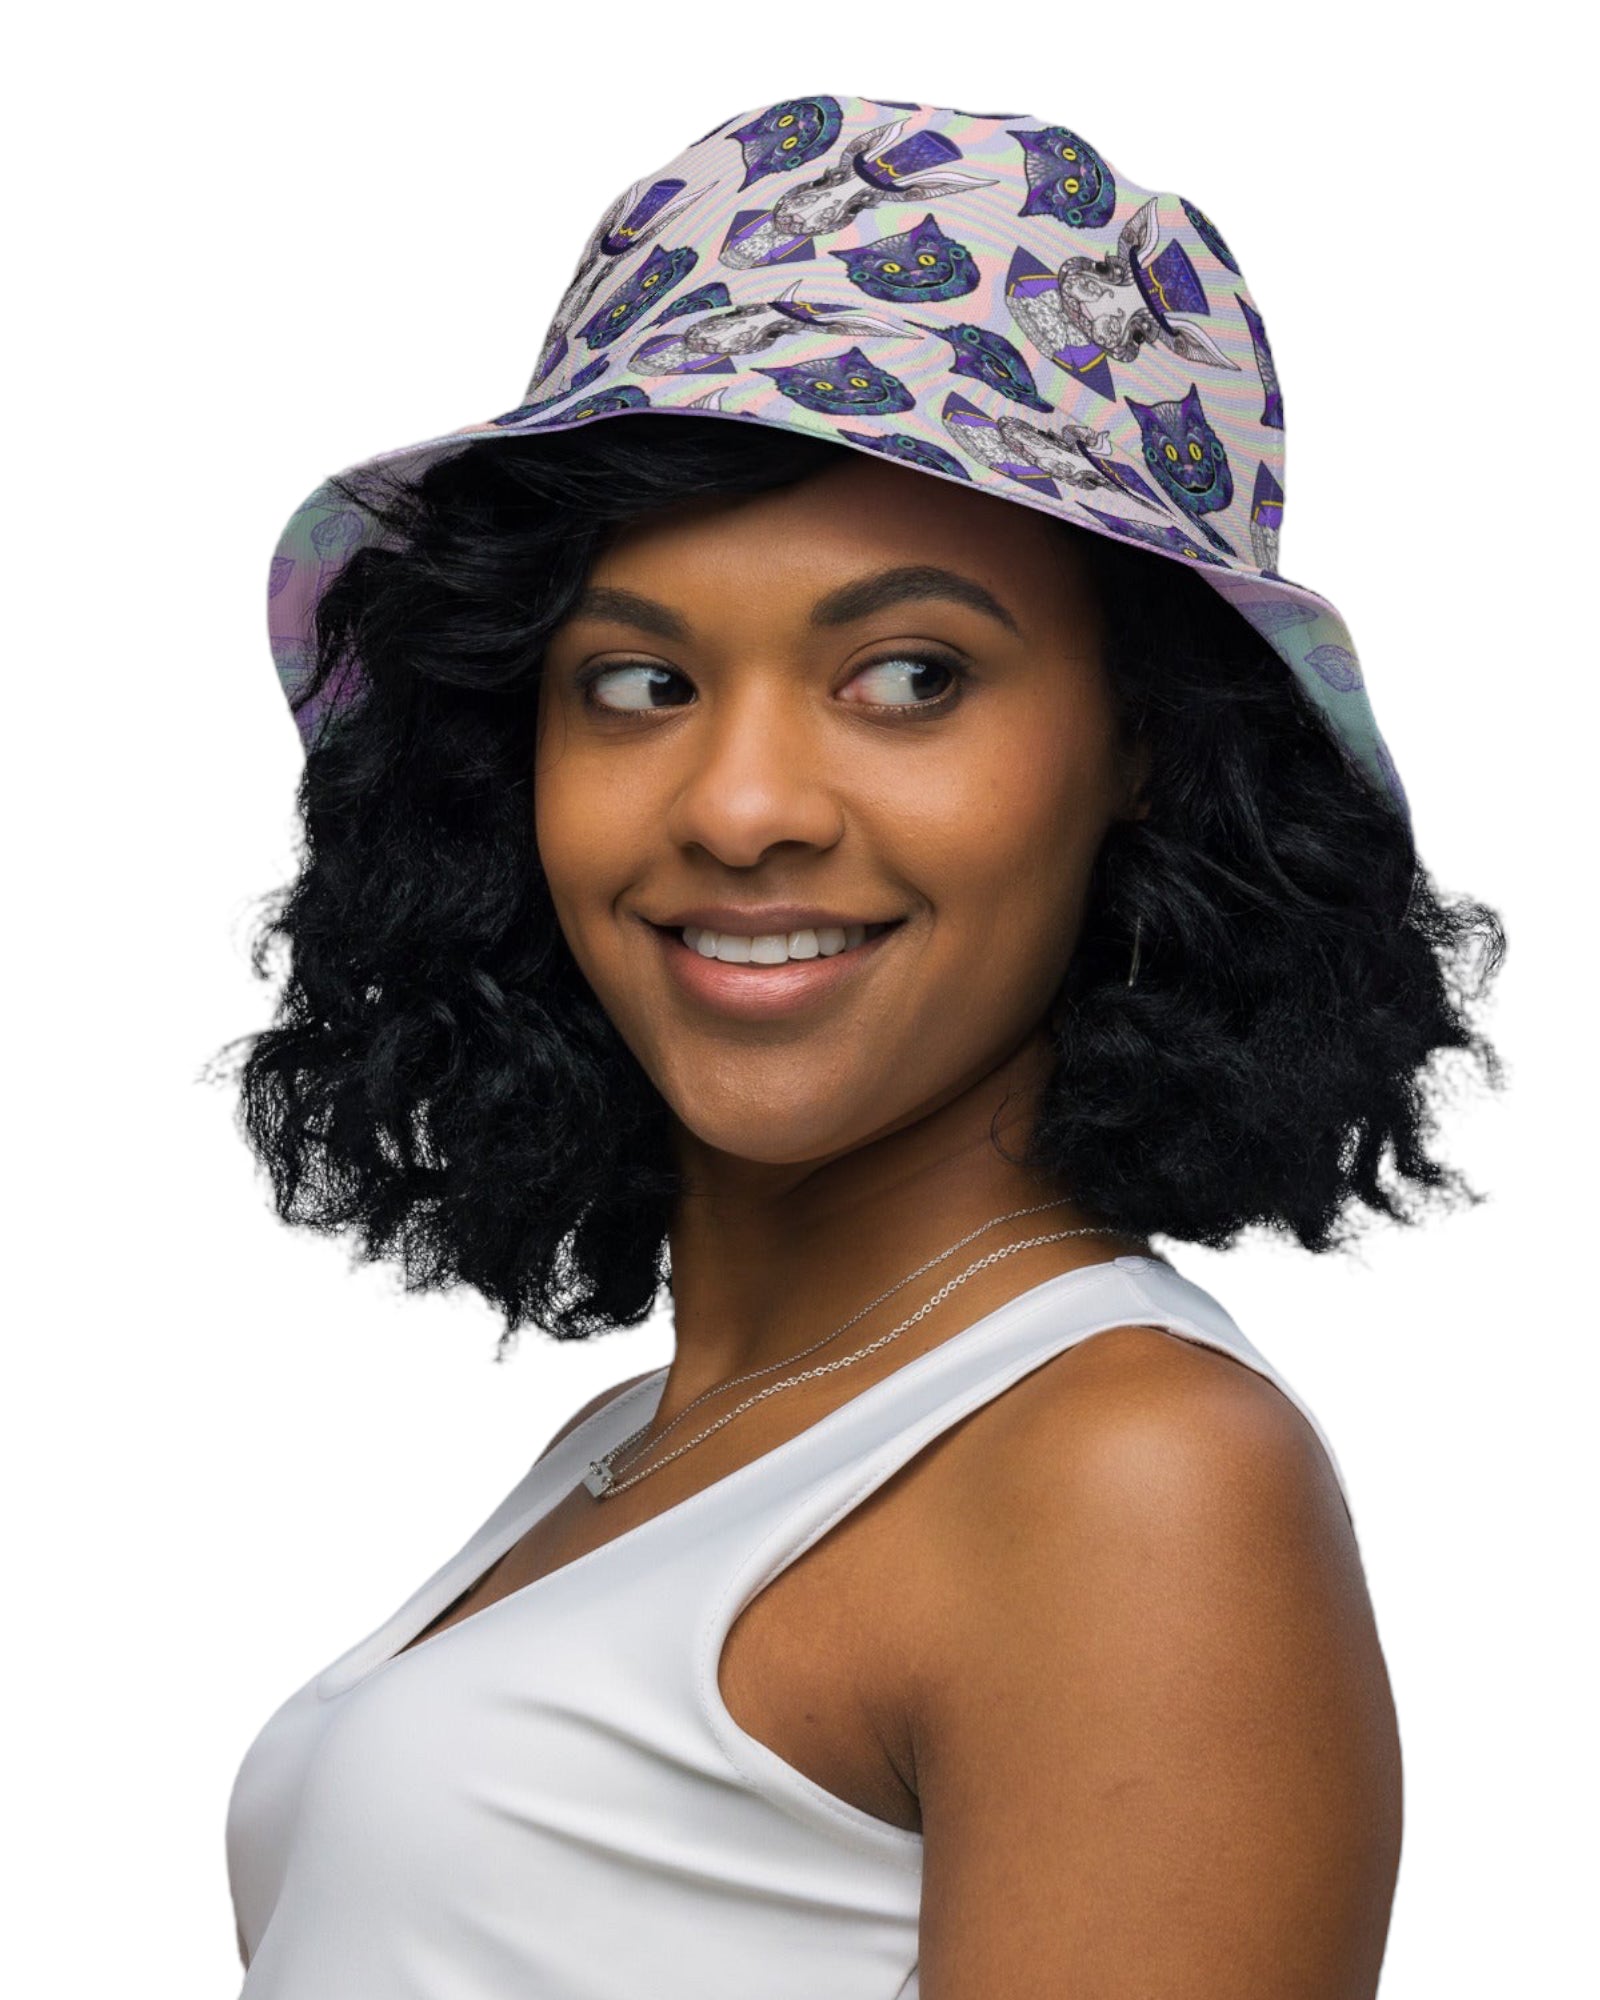 Mad Catter / Down The Rabbit Hole Reversible Bucket Hat